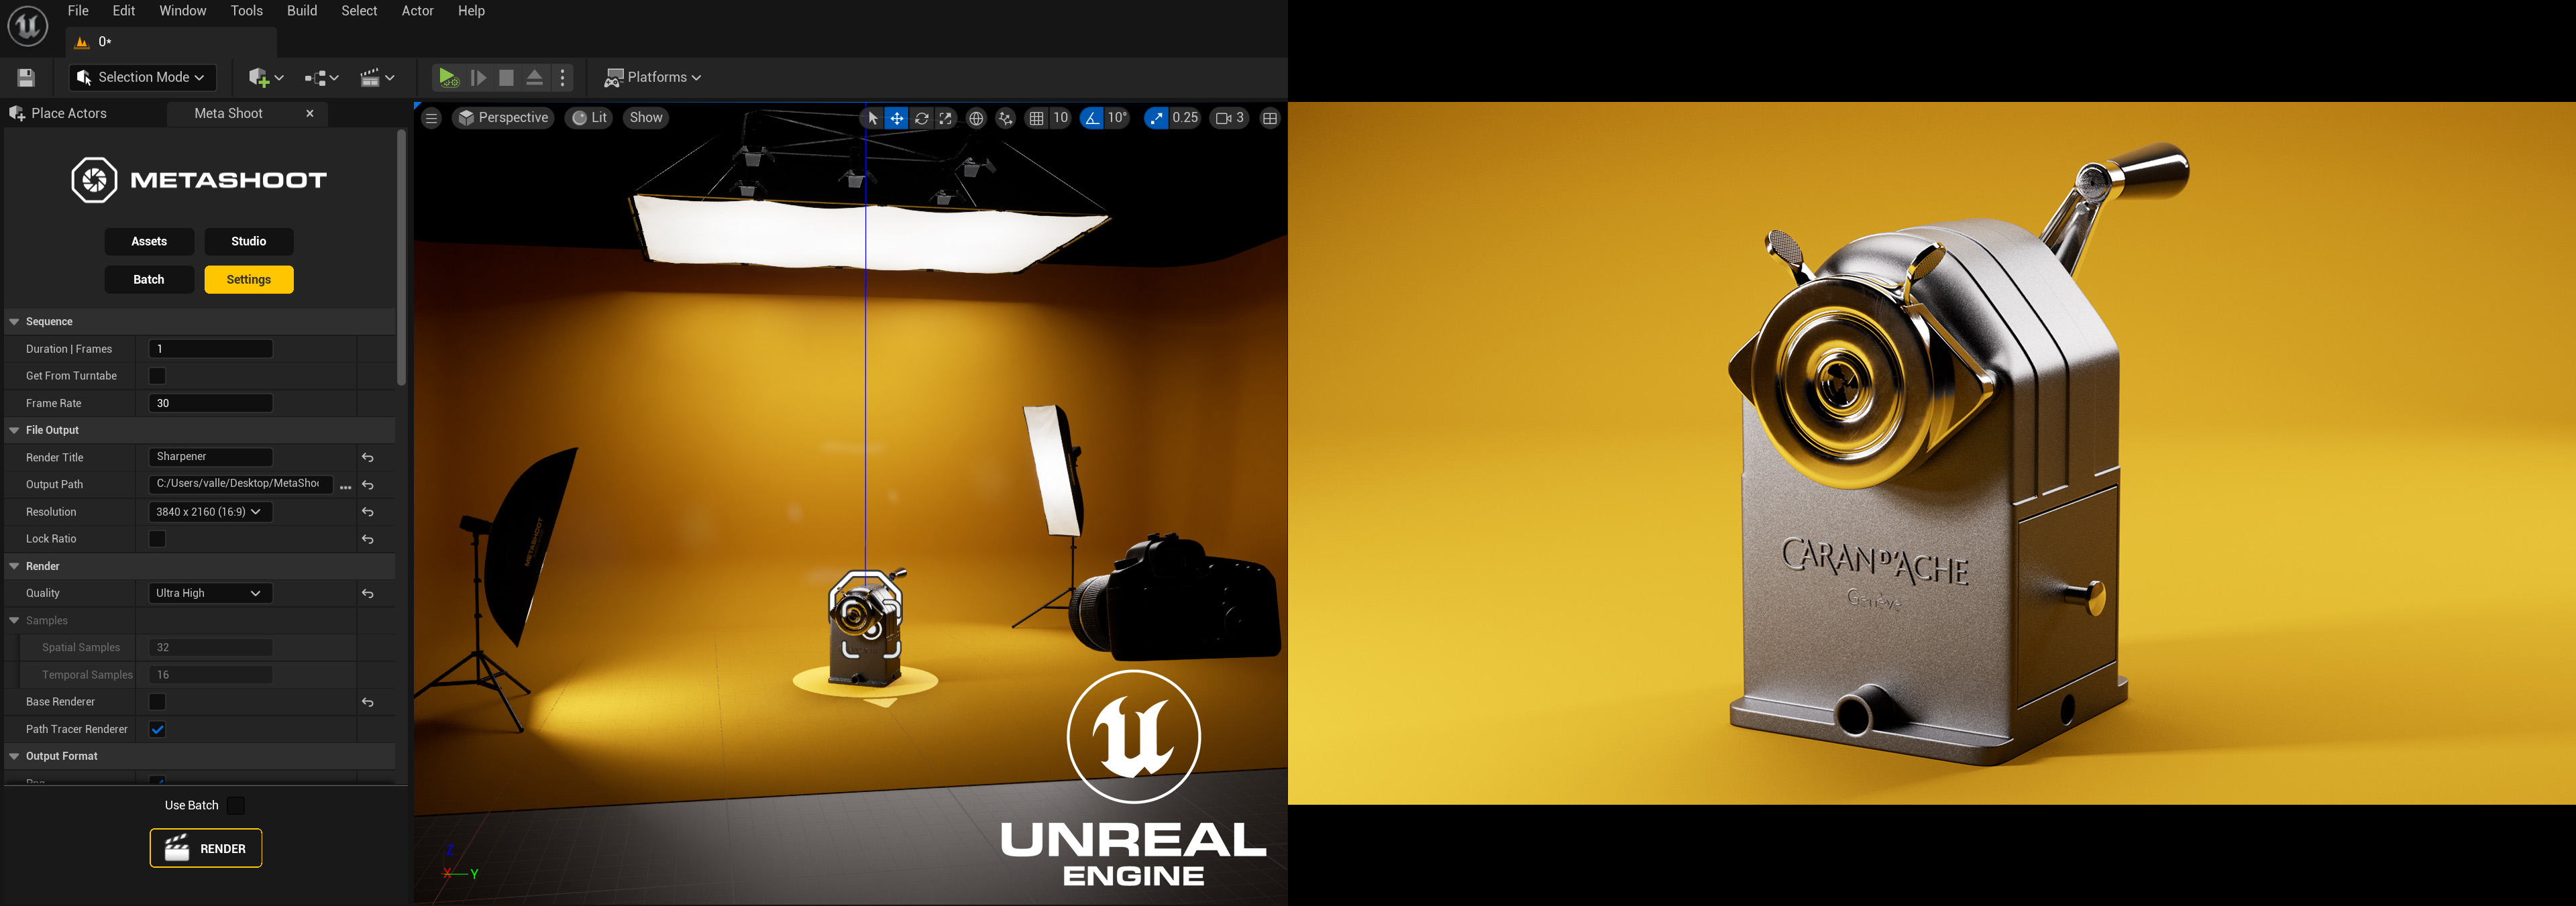 MetaShoot 3D Product Visualization in Unreal Engine